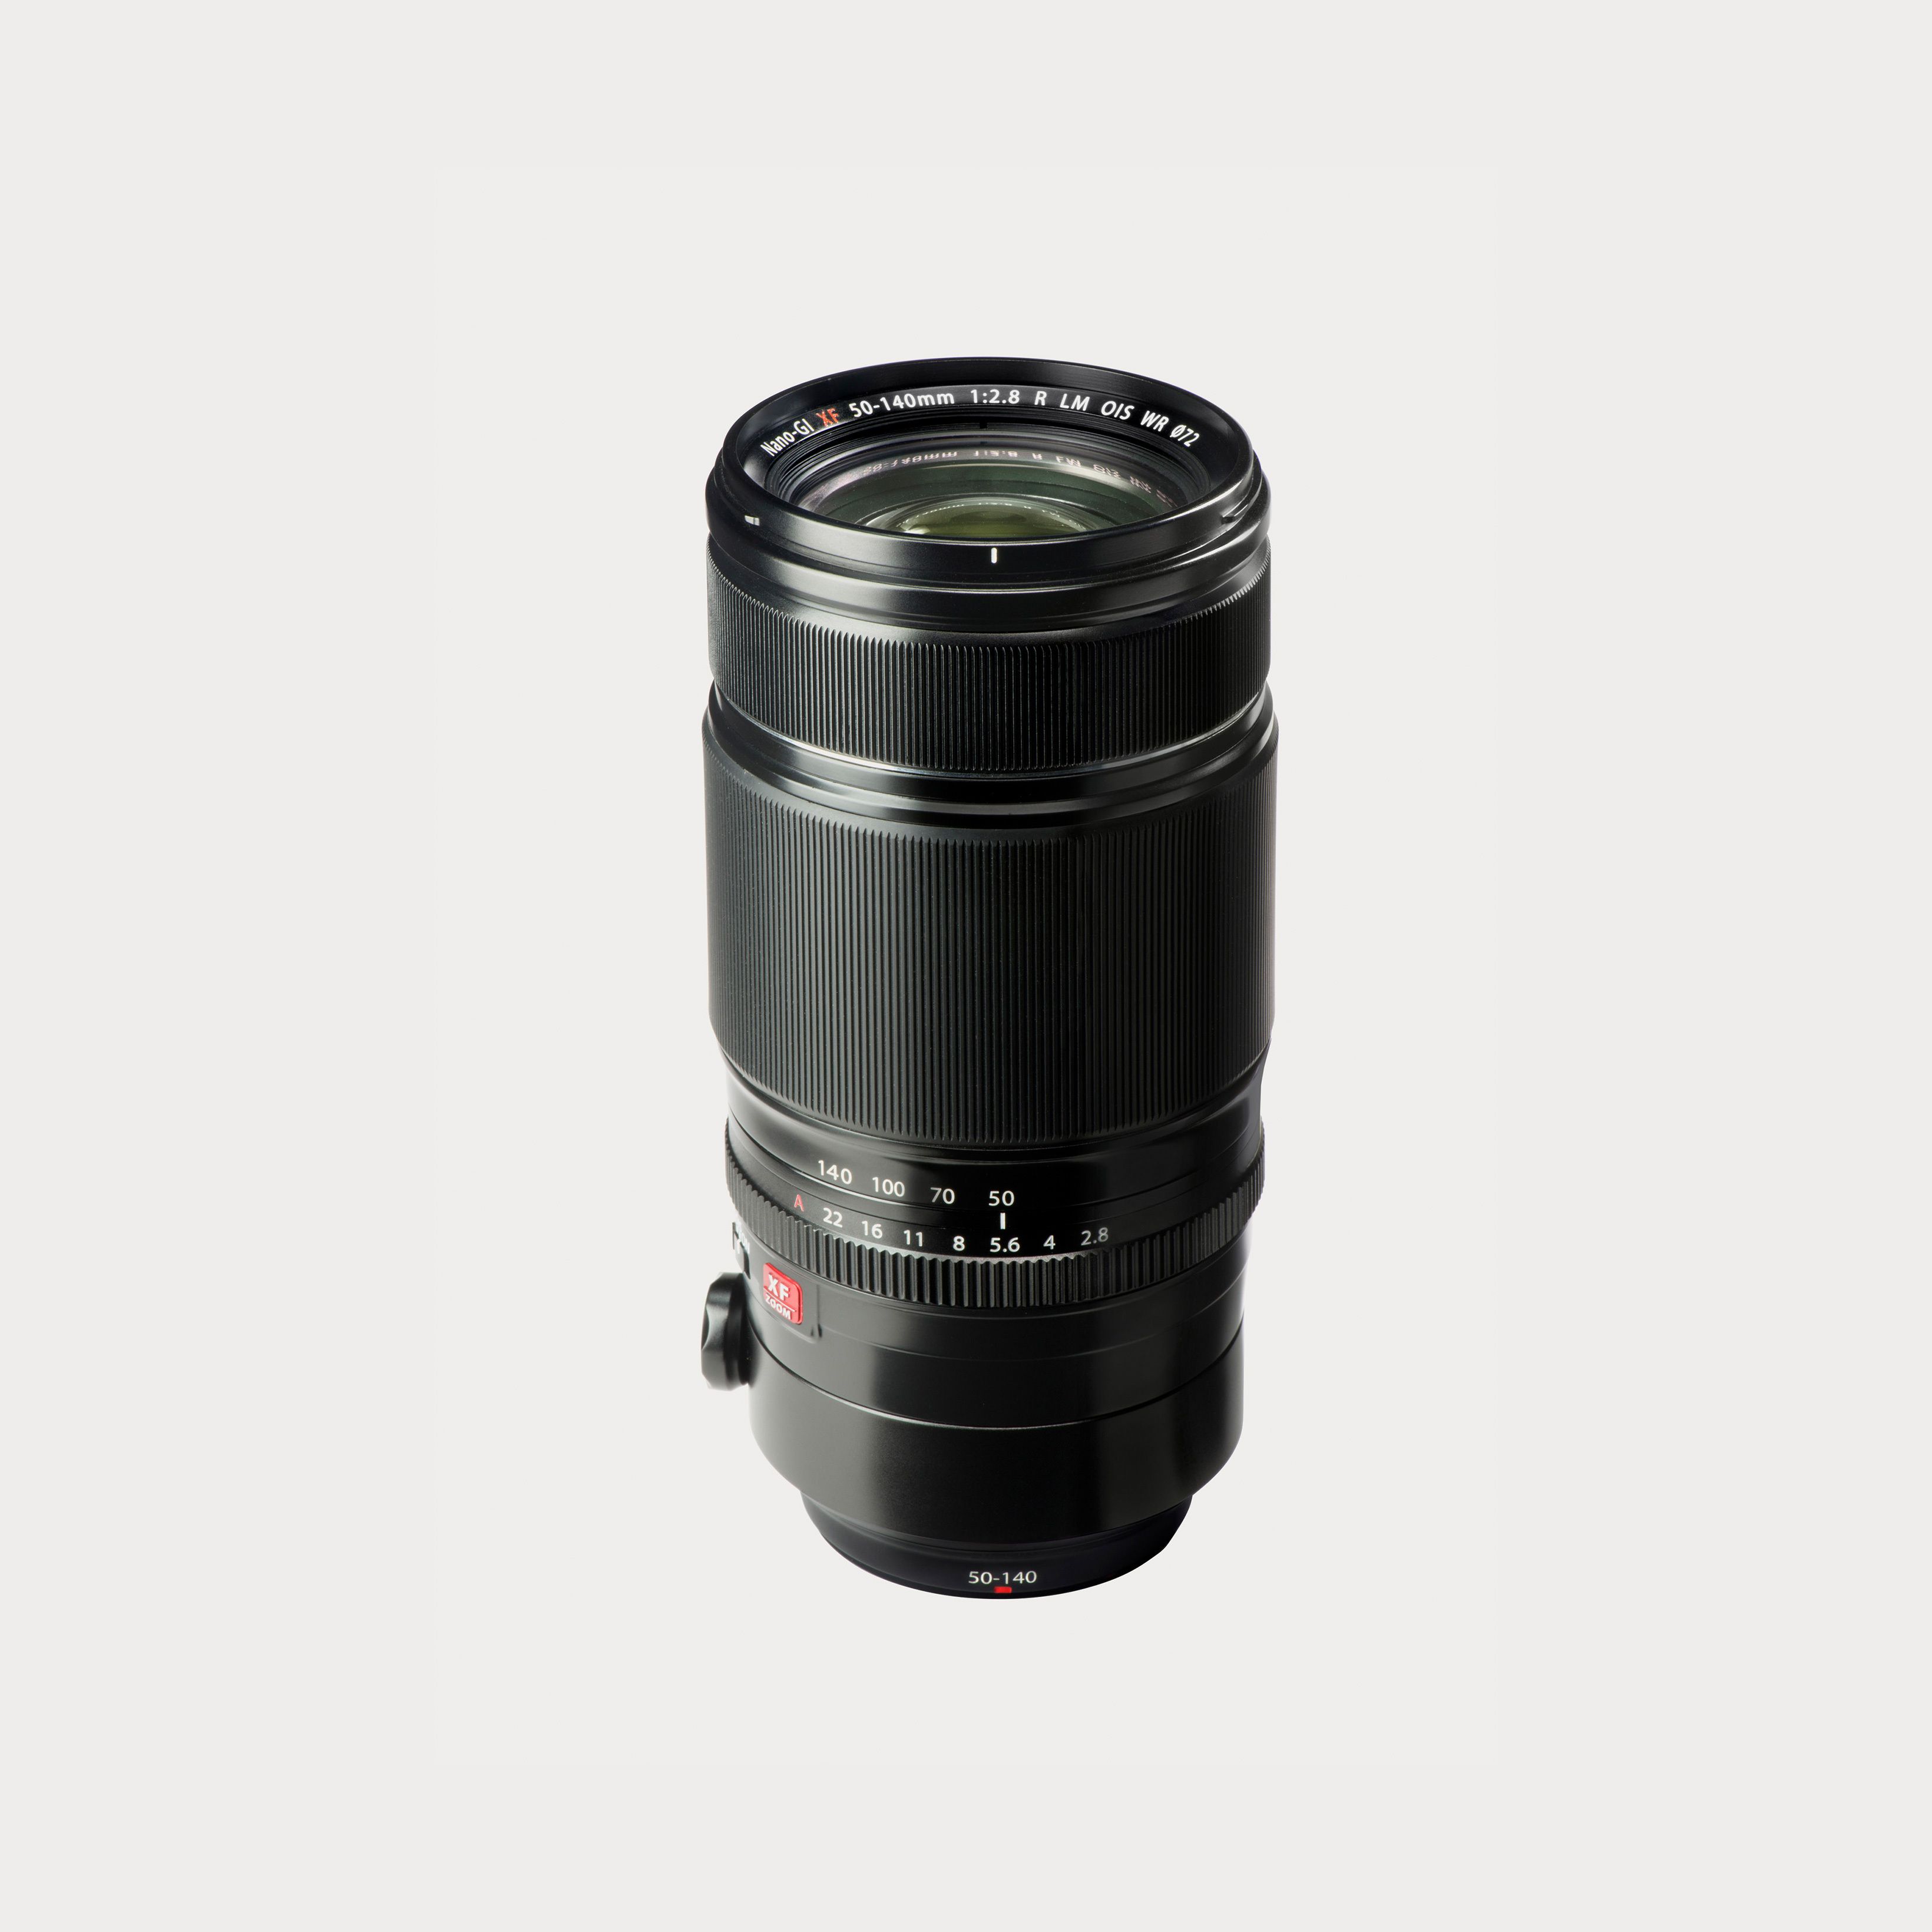 XF 50-140mm F2.8 R LM OIS WR Lens | Moment